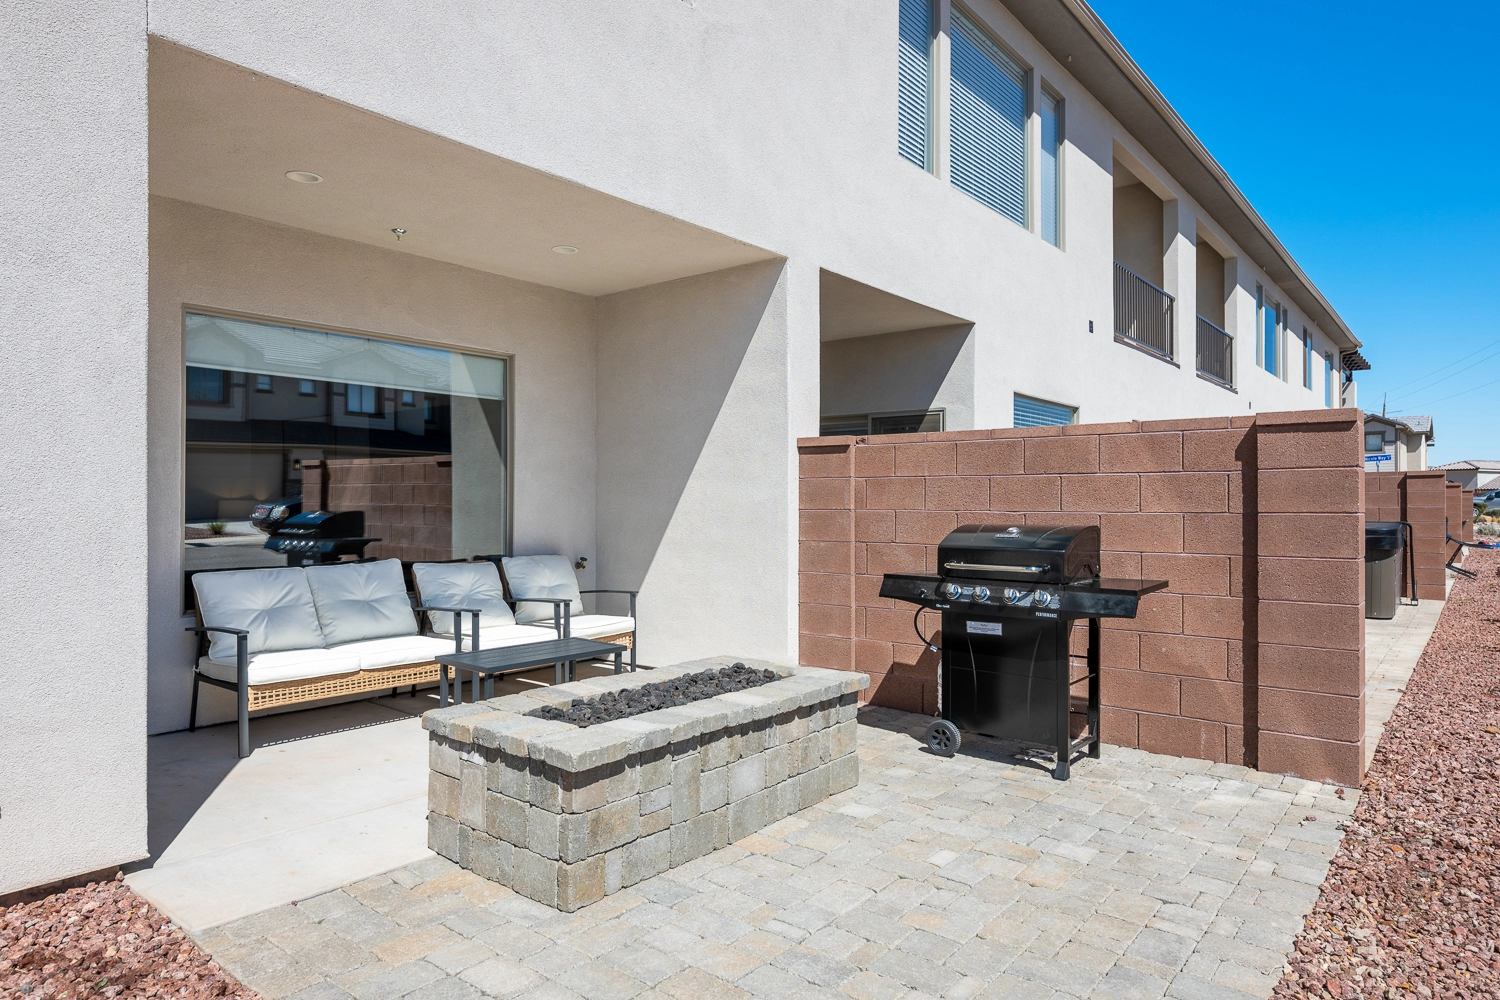 Patio Seating, Fire Table, Grill